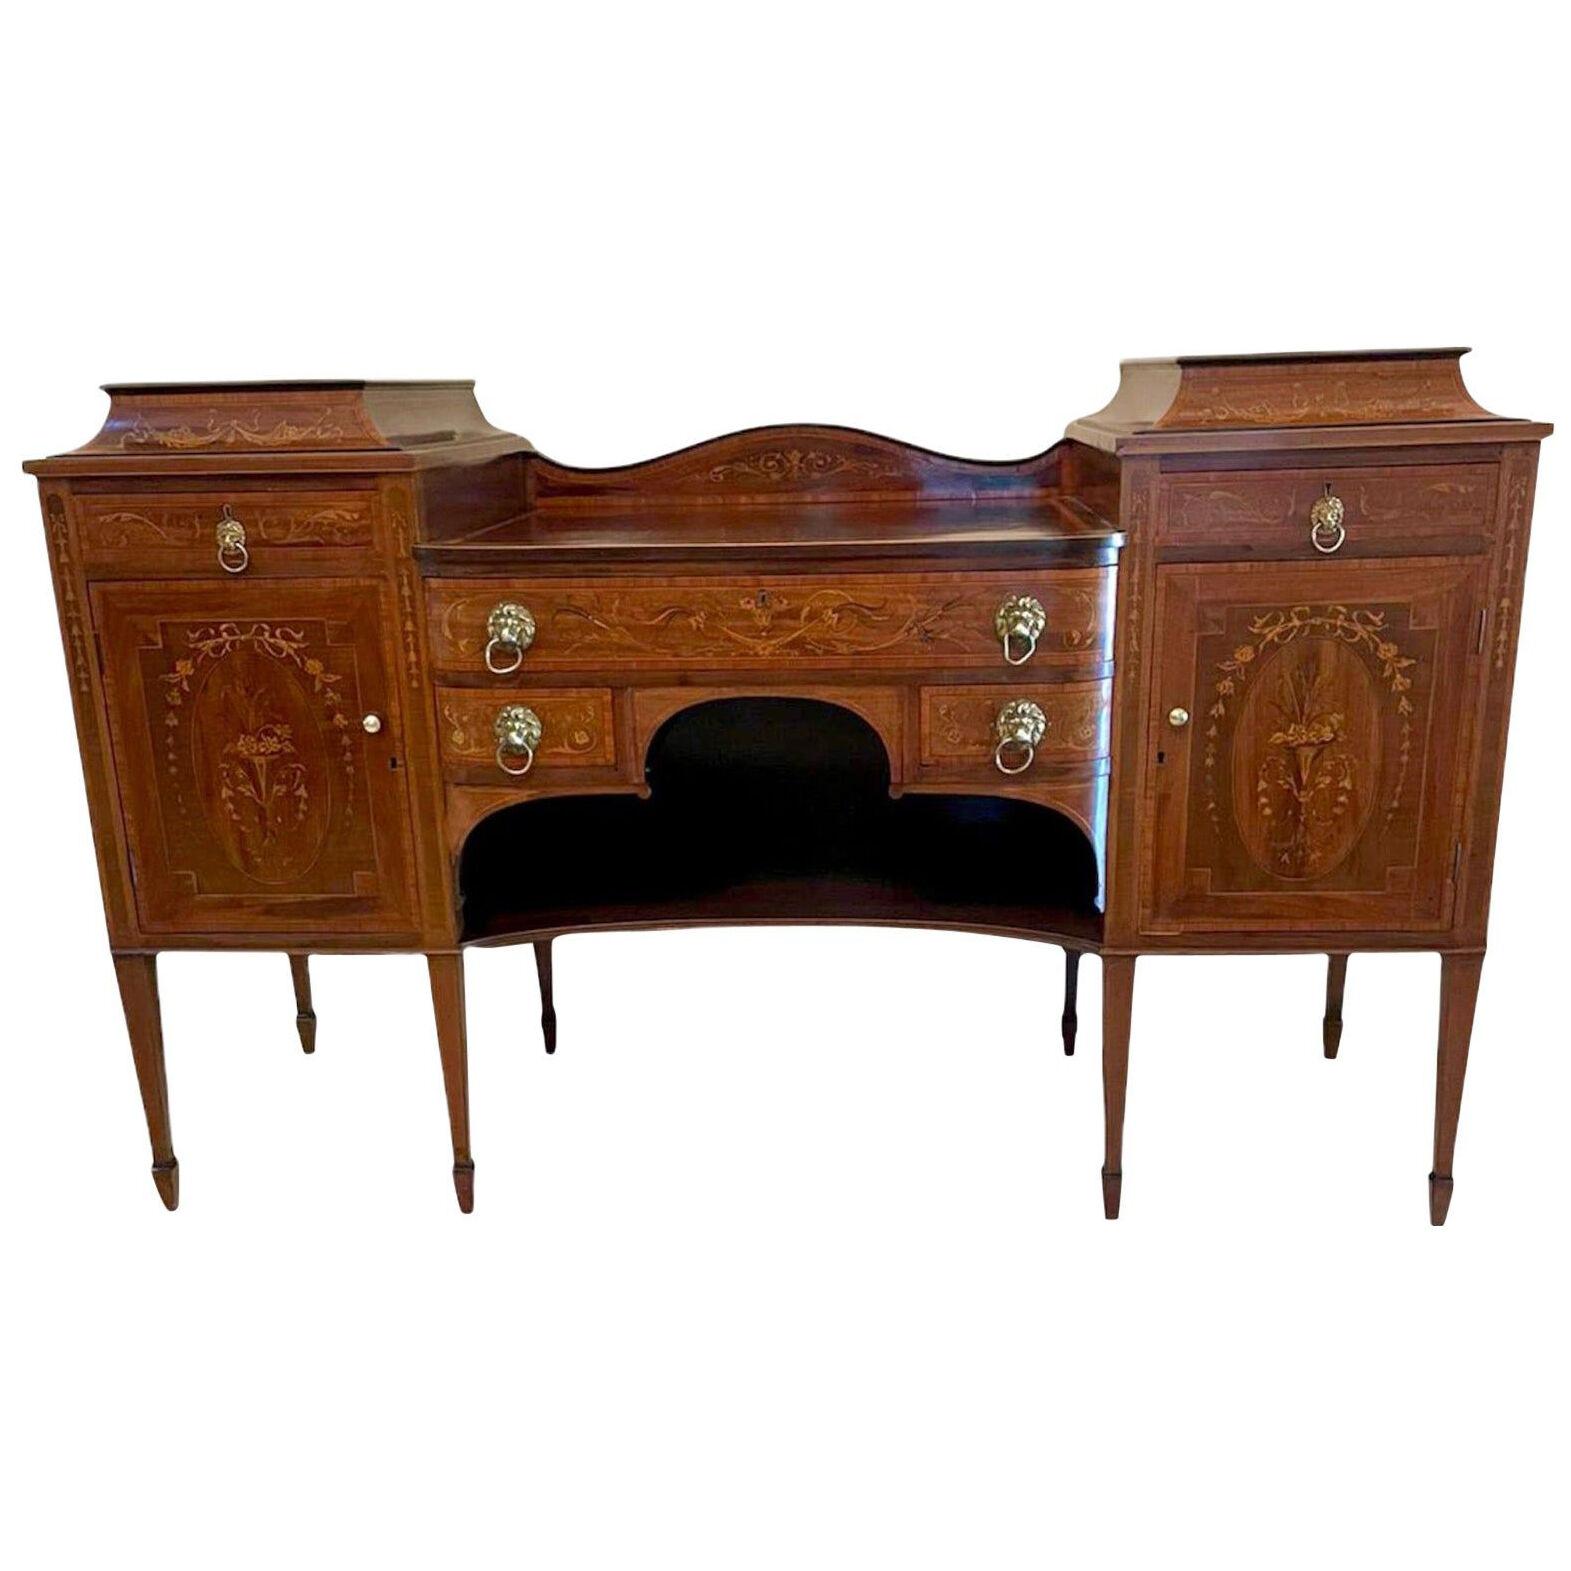 Quality 19th Century Mahogany Inlaid Marquetry Sideboard by Hewetsons, London